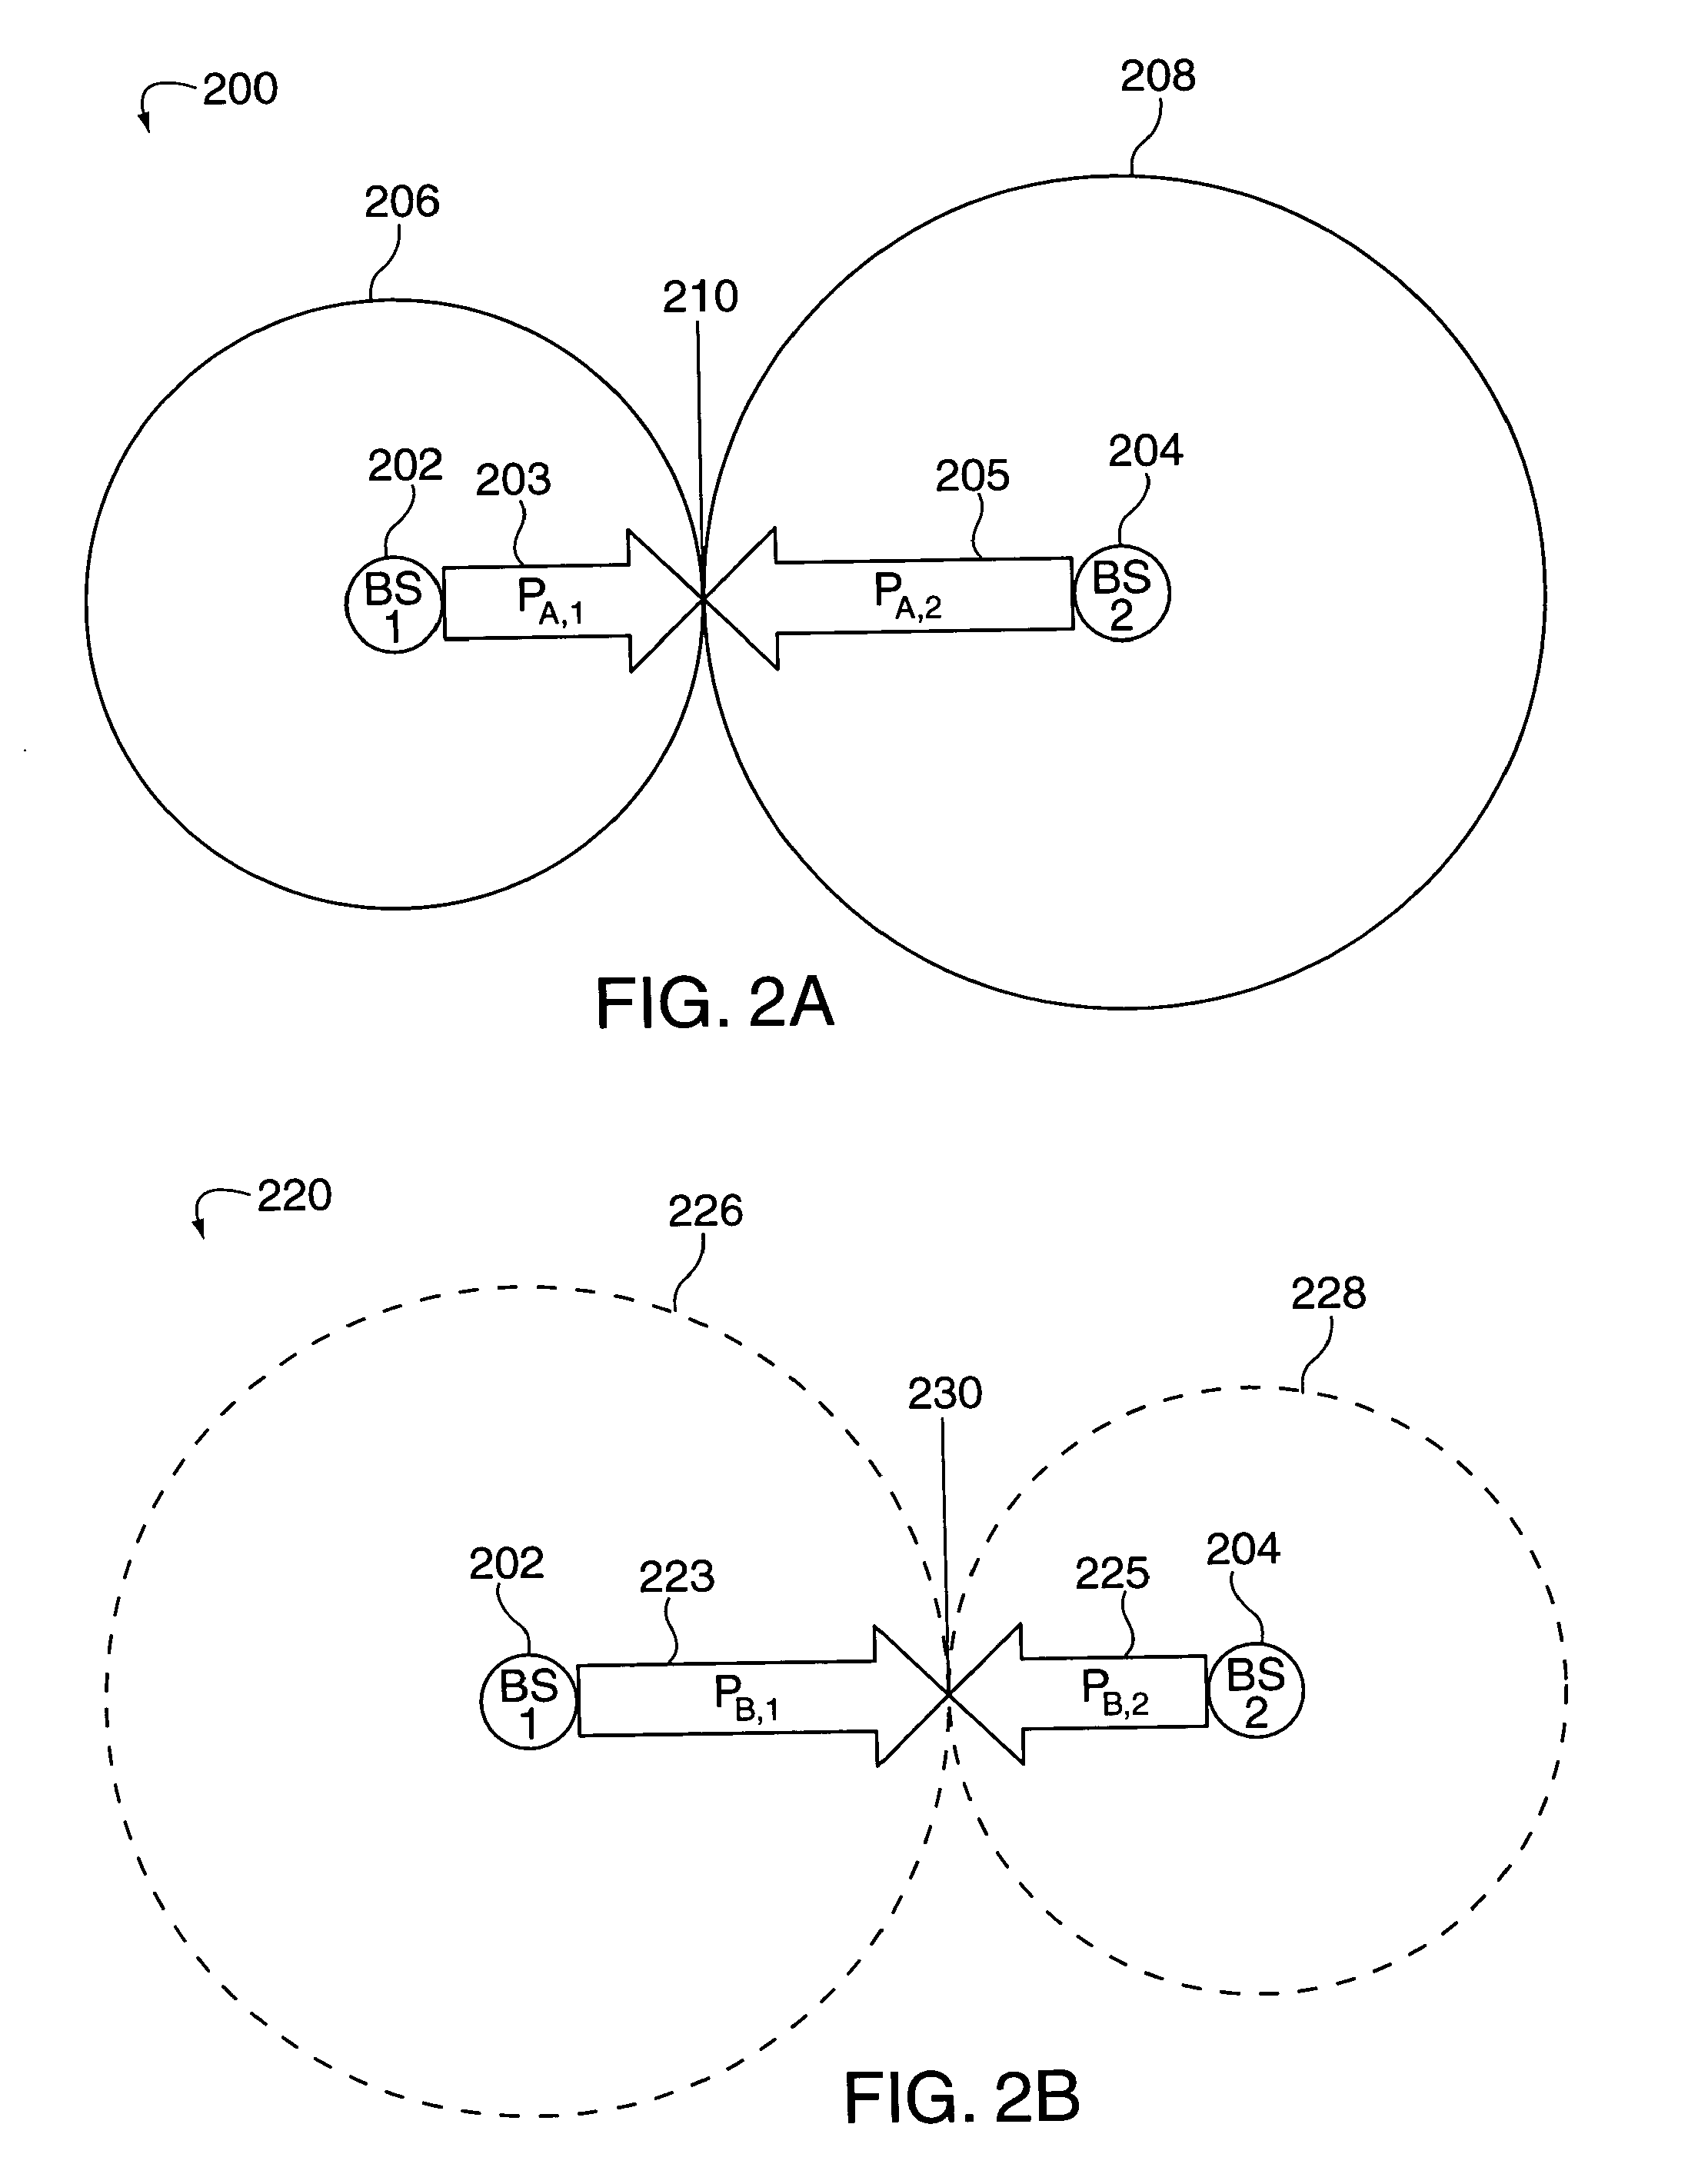 Method of creating and utilizing diversity in a multiple carrier communciation system